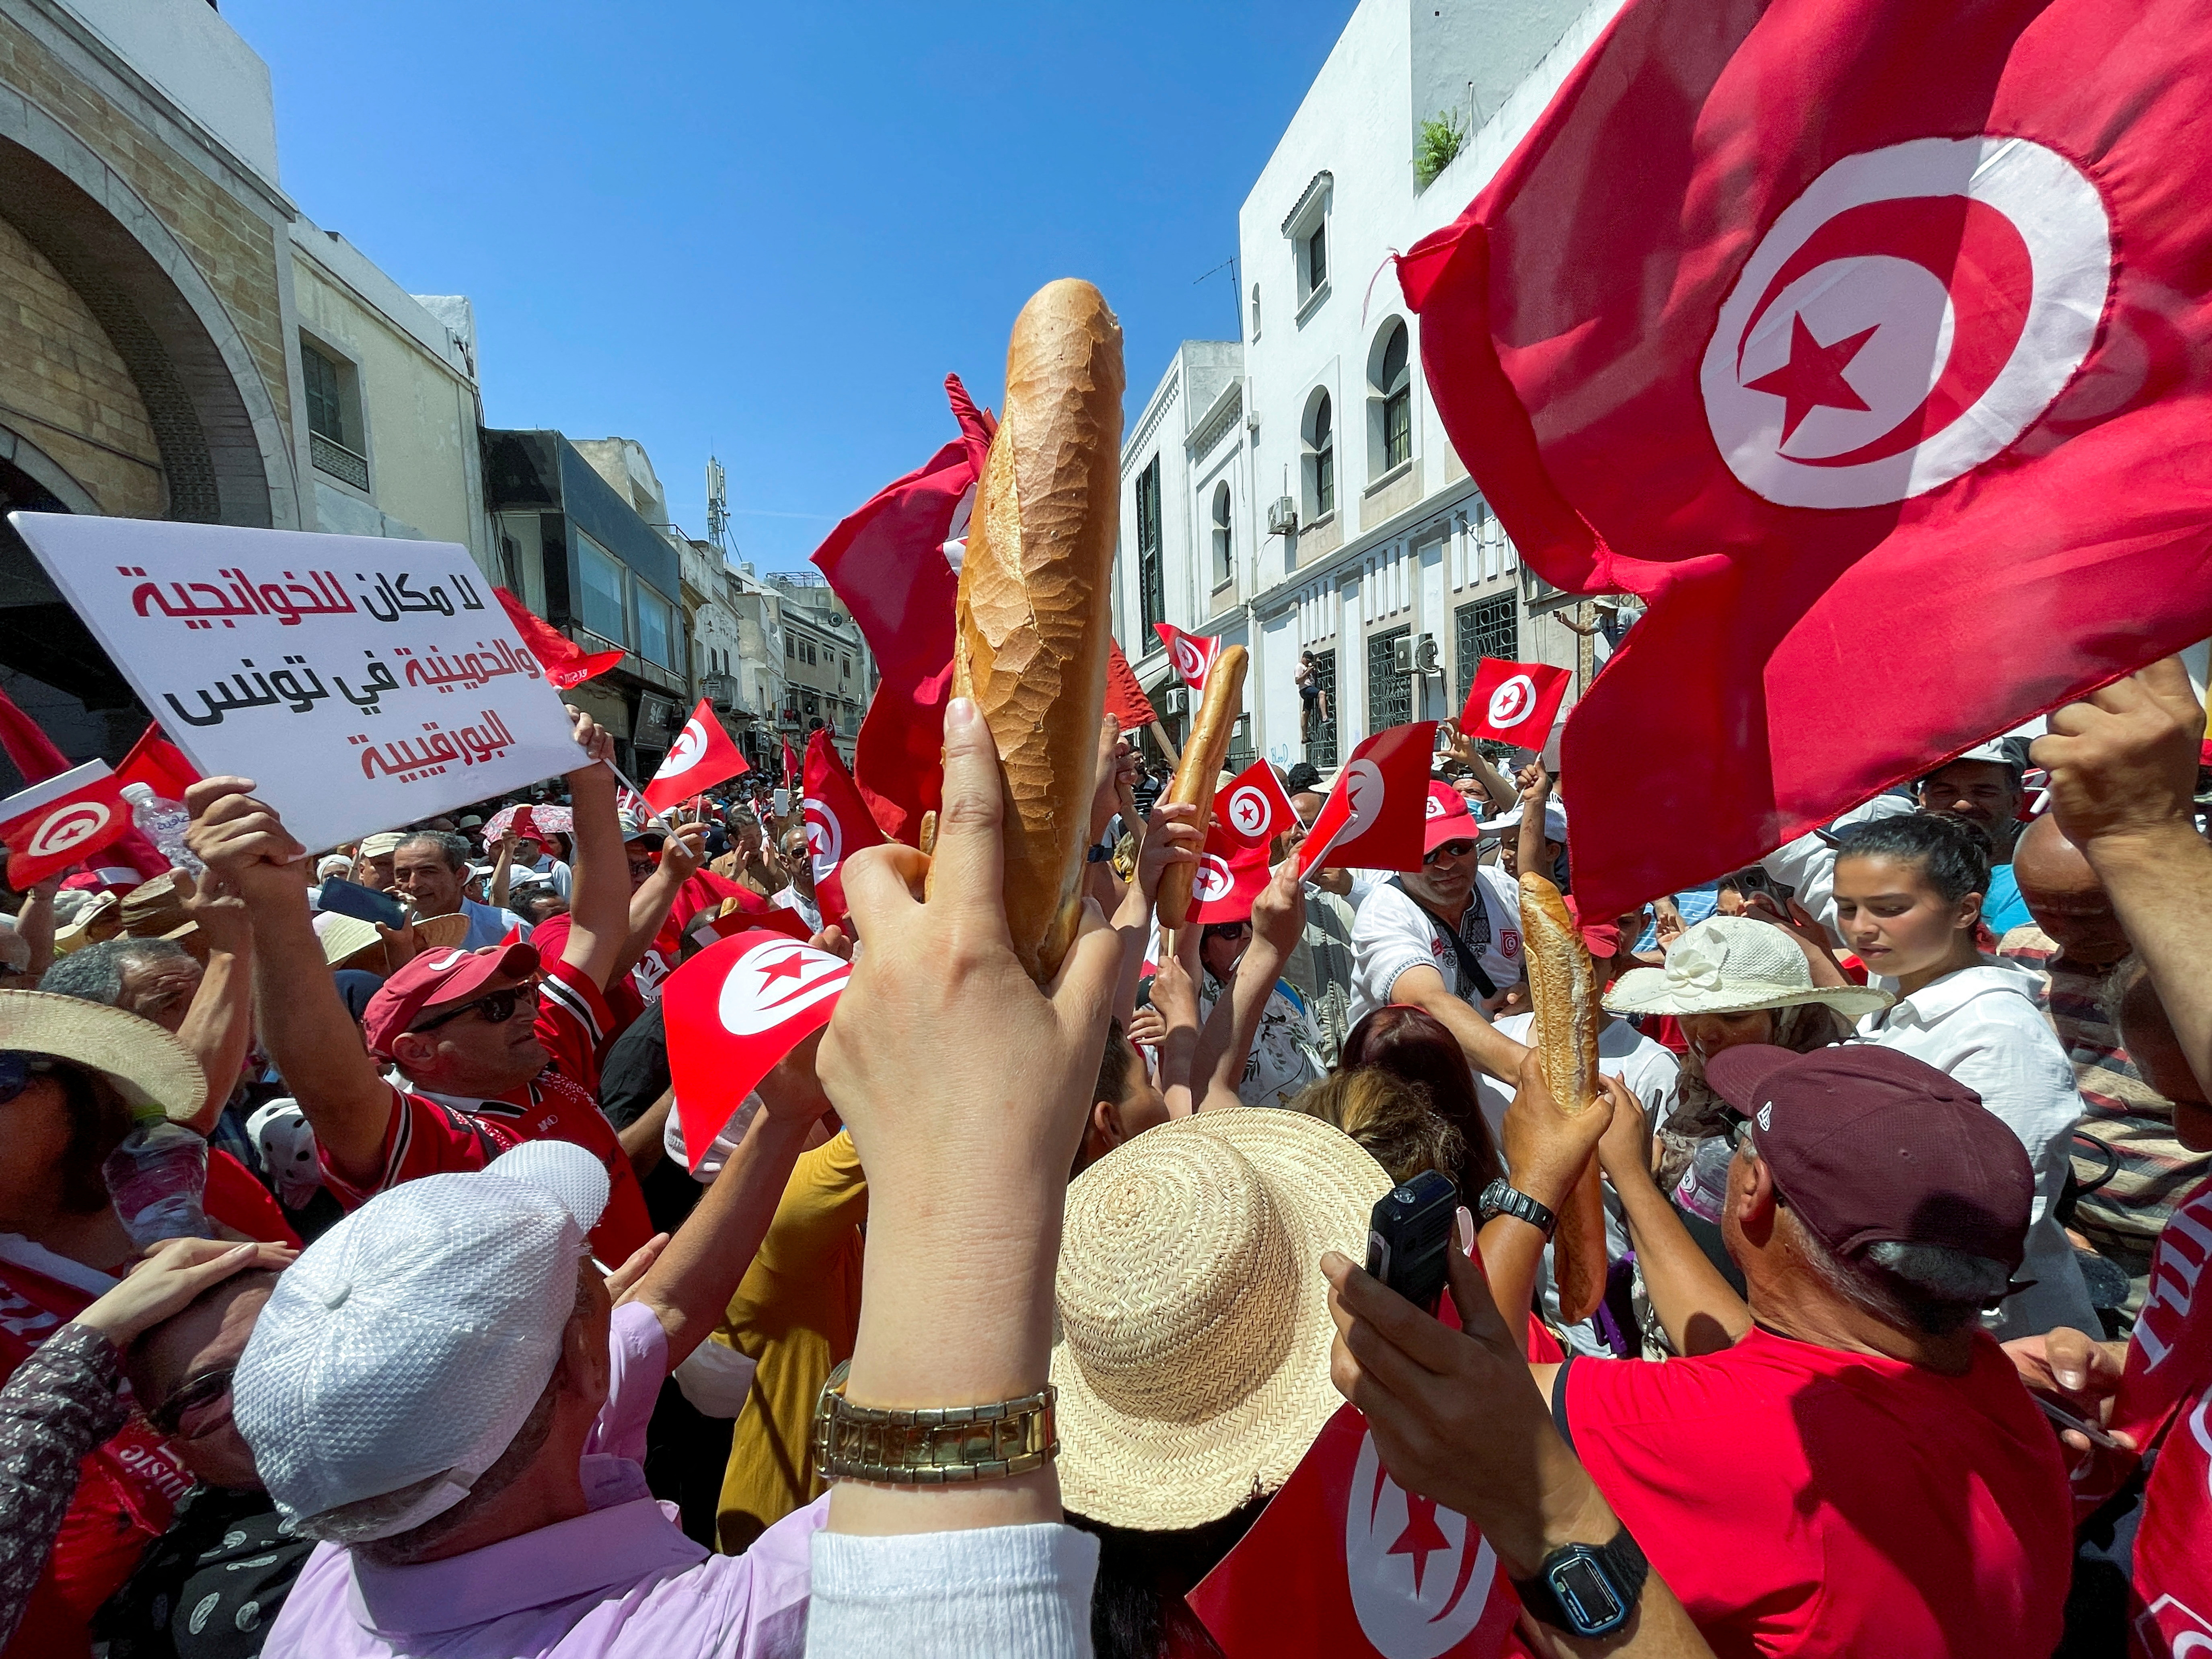 FILE PHOTO: Demonstrators hold loaves of bread as they protest in opposition to a referendum on a new constitution called by President Kais Saied, in Tunis, Tunisia June 18, 2022. REUTERS/Jihed Abidellaoui/File Photo